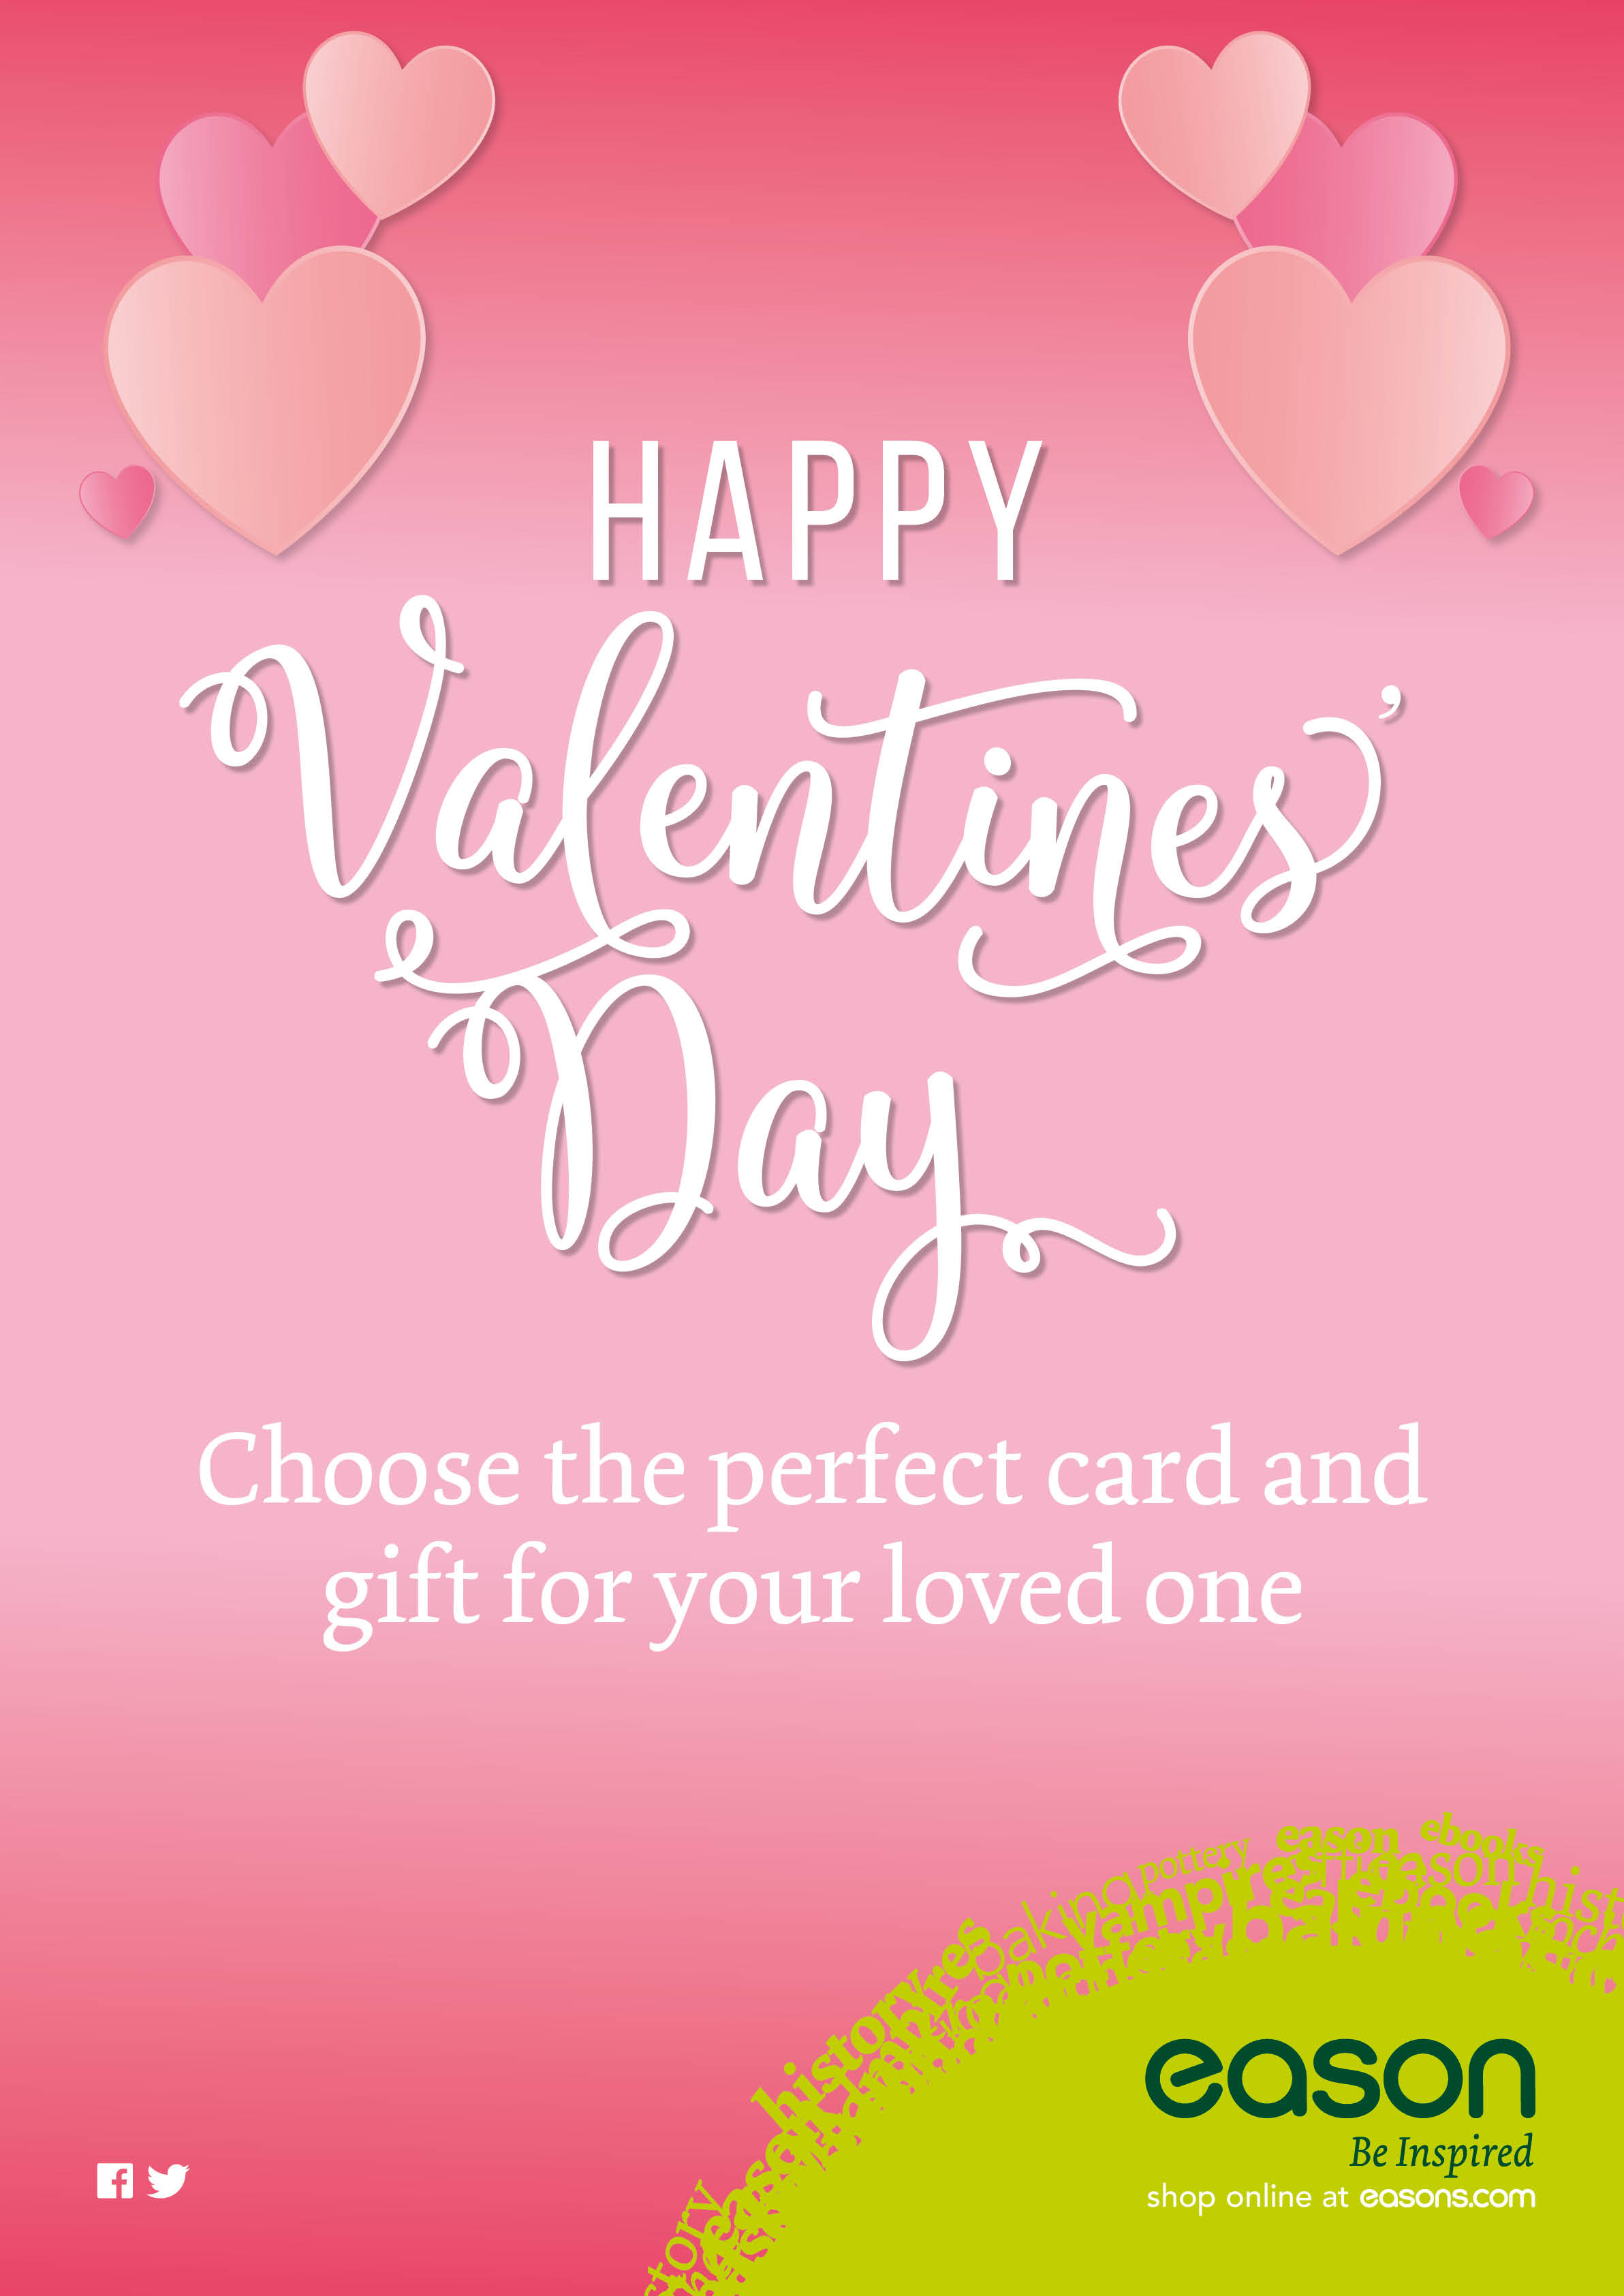 528_Valentines Day A0 Generic Poster | Athlone Towncentre Shopping Centre